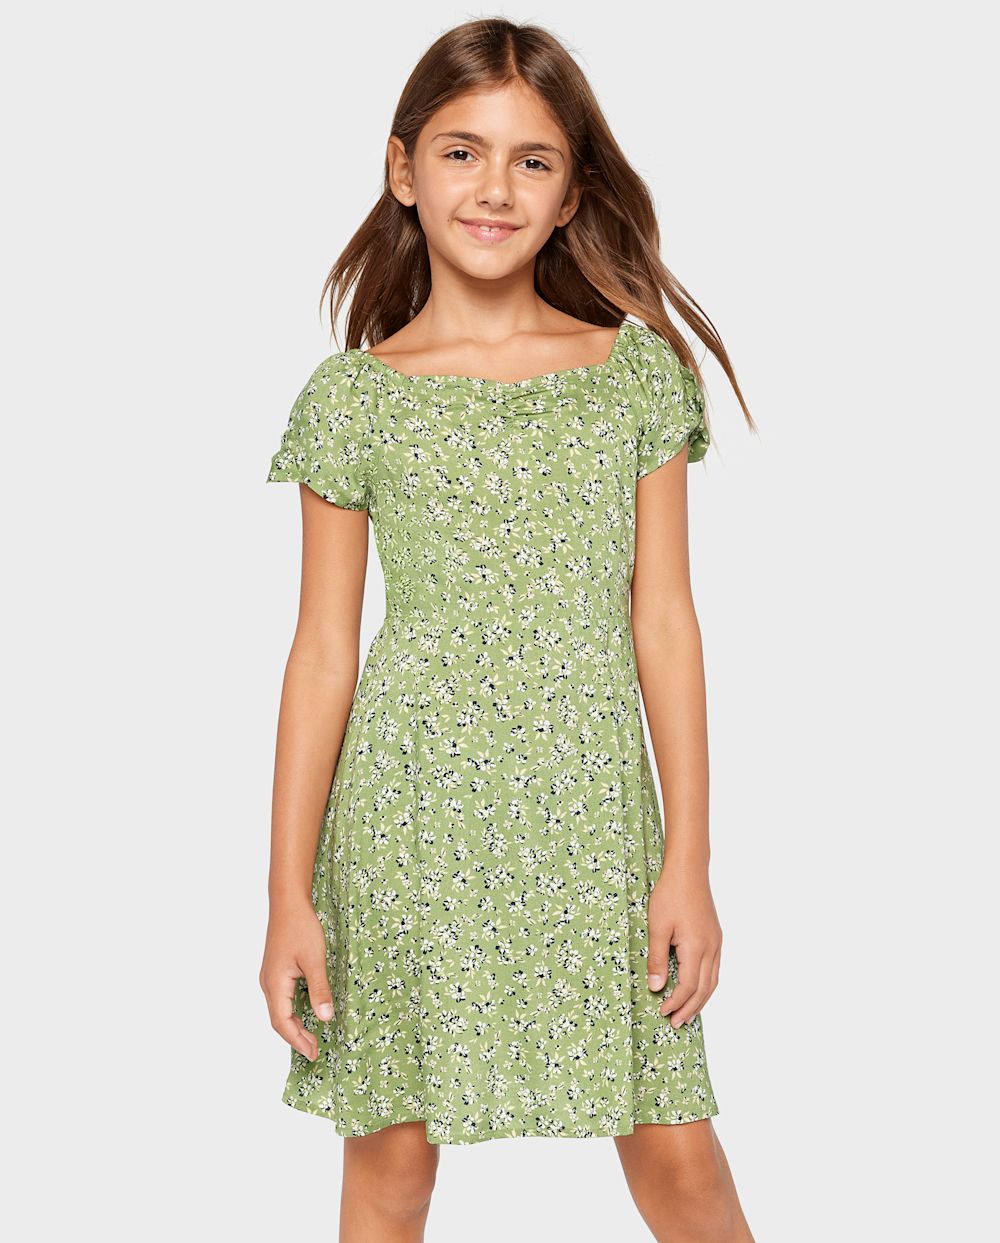 Girls V-neck Rayon Short Sleeves Sleeves Smocked Ruched Above the Knee Floral Print Dress